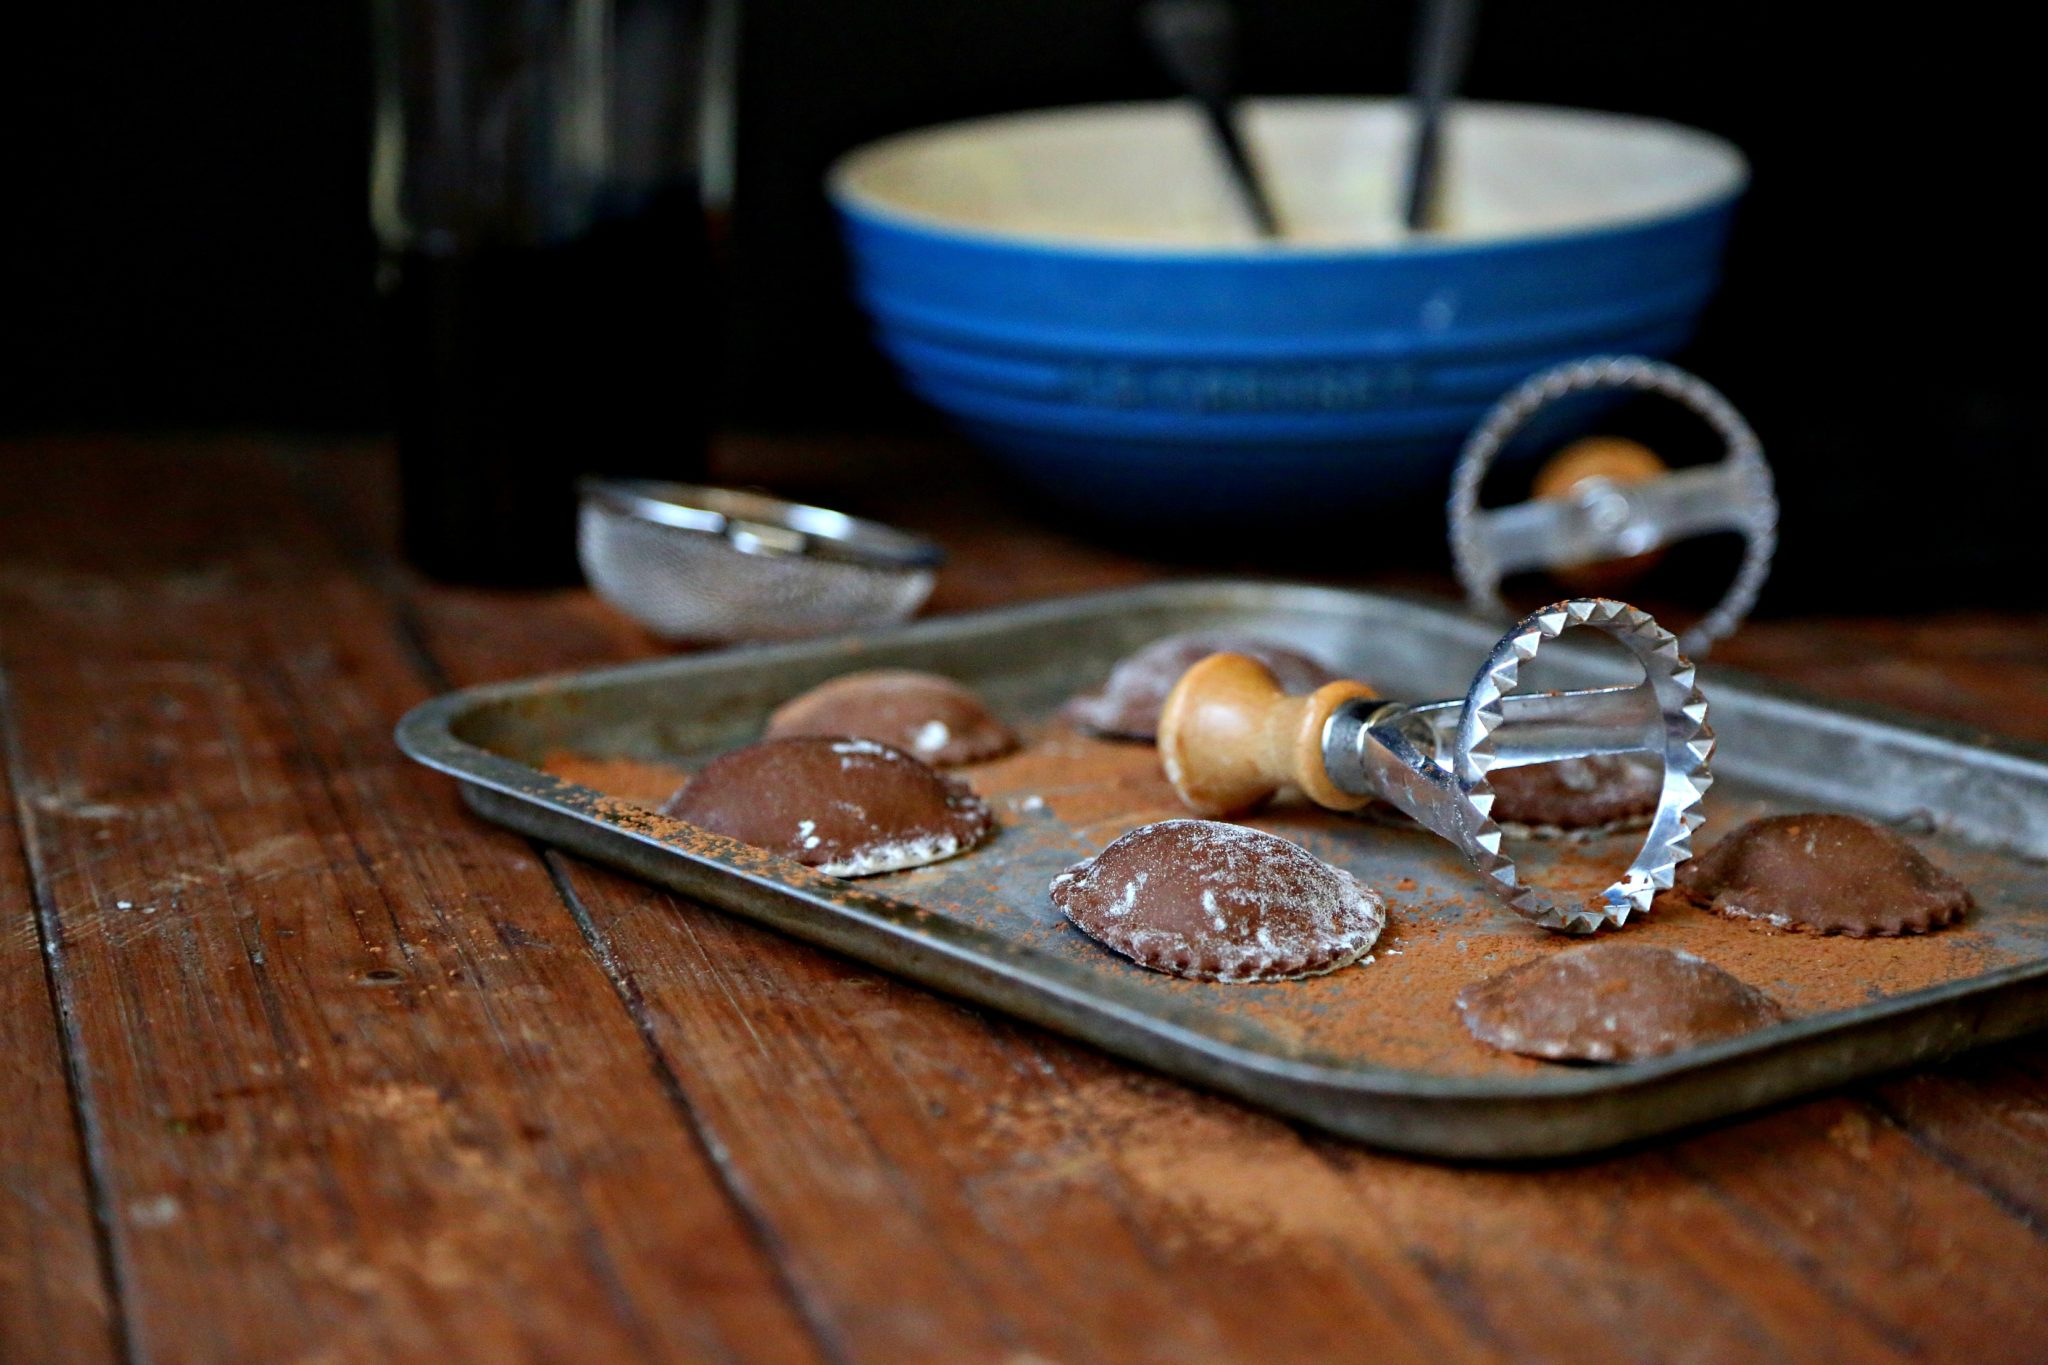 chocolate ravioli on baking sheet with ravioli stamps and blue bowl of filling in background.